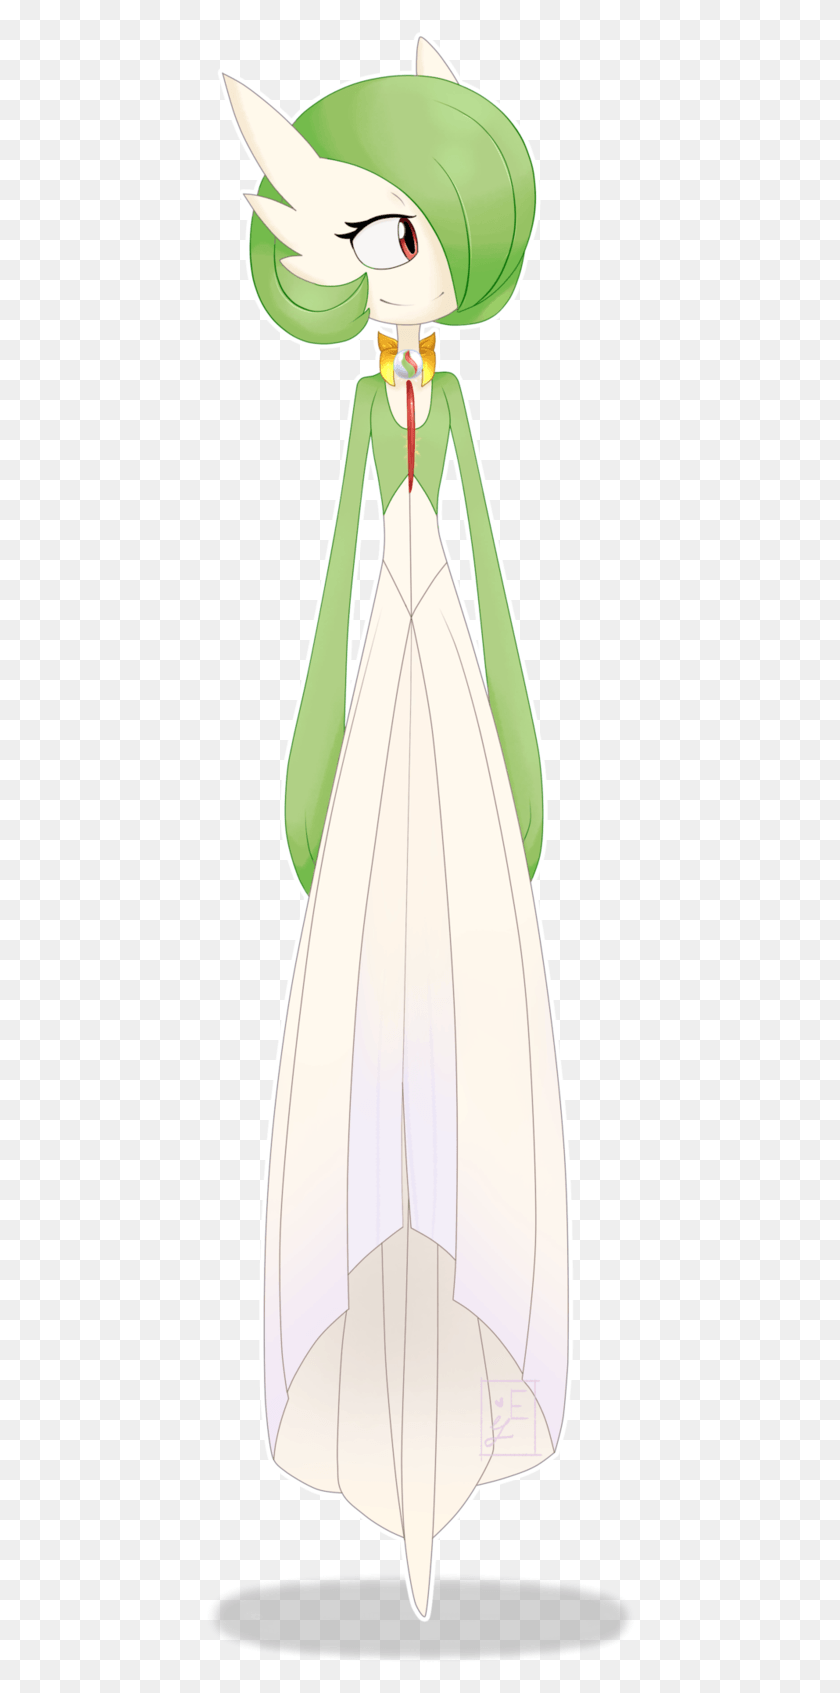 430x1633 Elisee The Gardevoir By Elisee Ysum Illustration, Clothing, Apparel, Fashion HD PNG Download